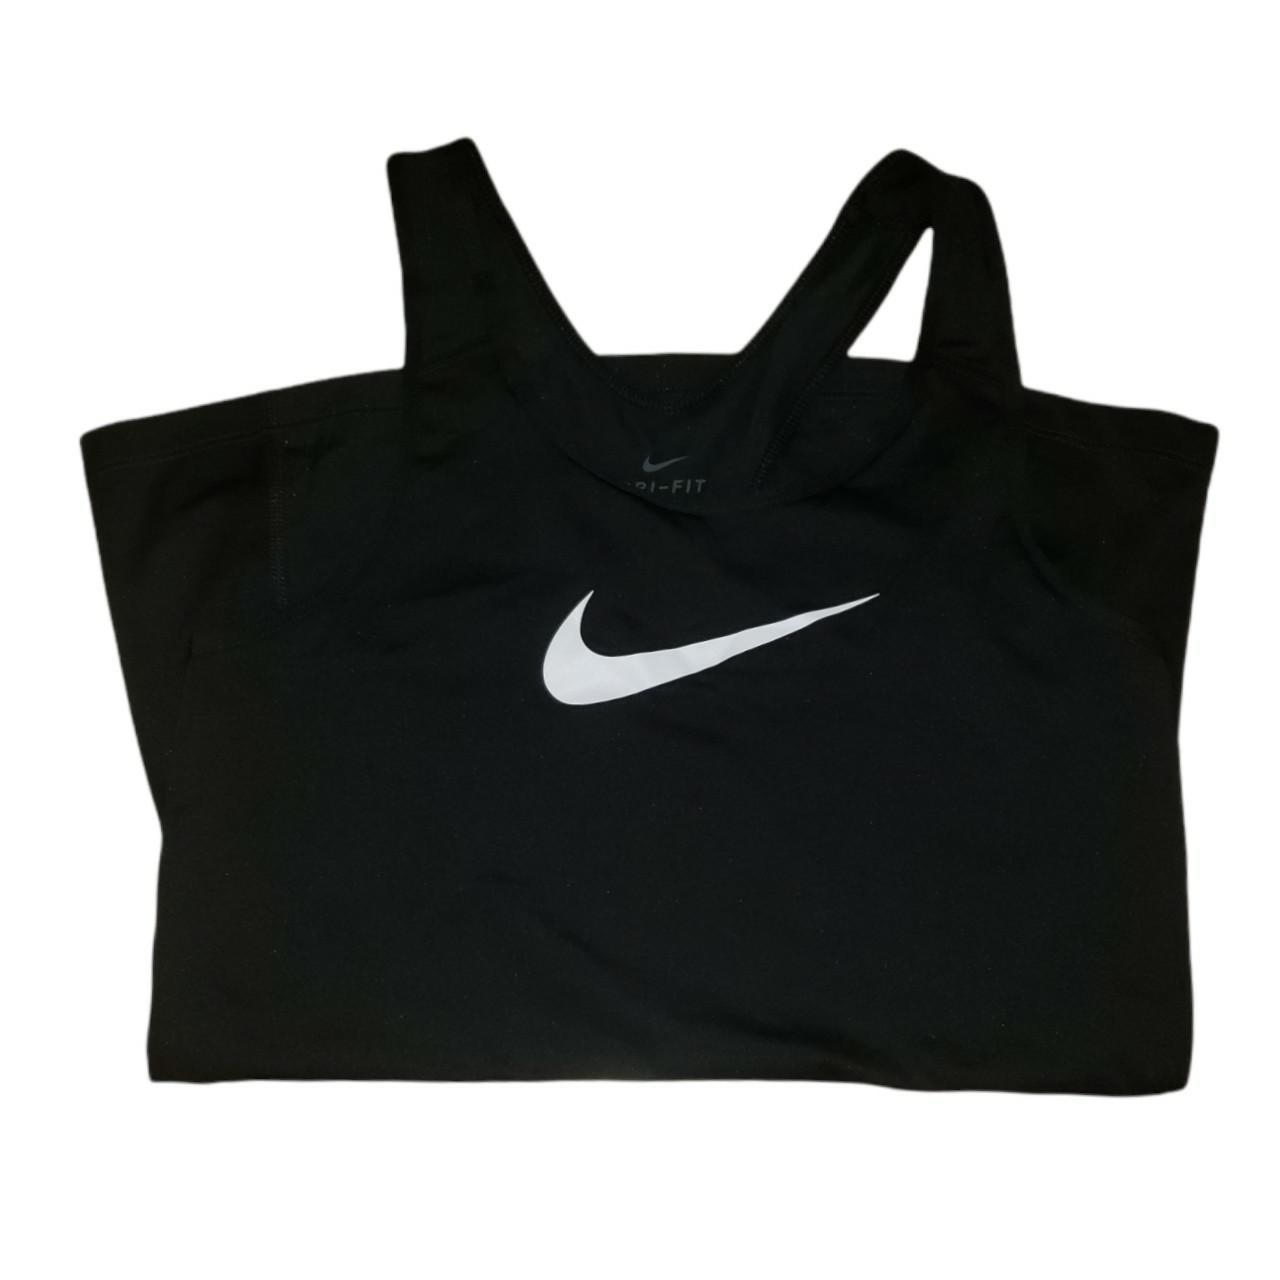 Product Image 3 - Nike Dri-Fit Tank Top.
Size Small,